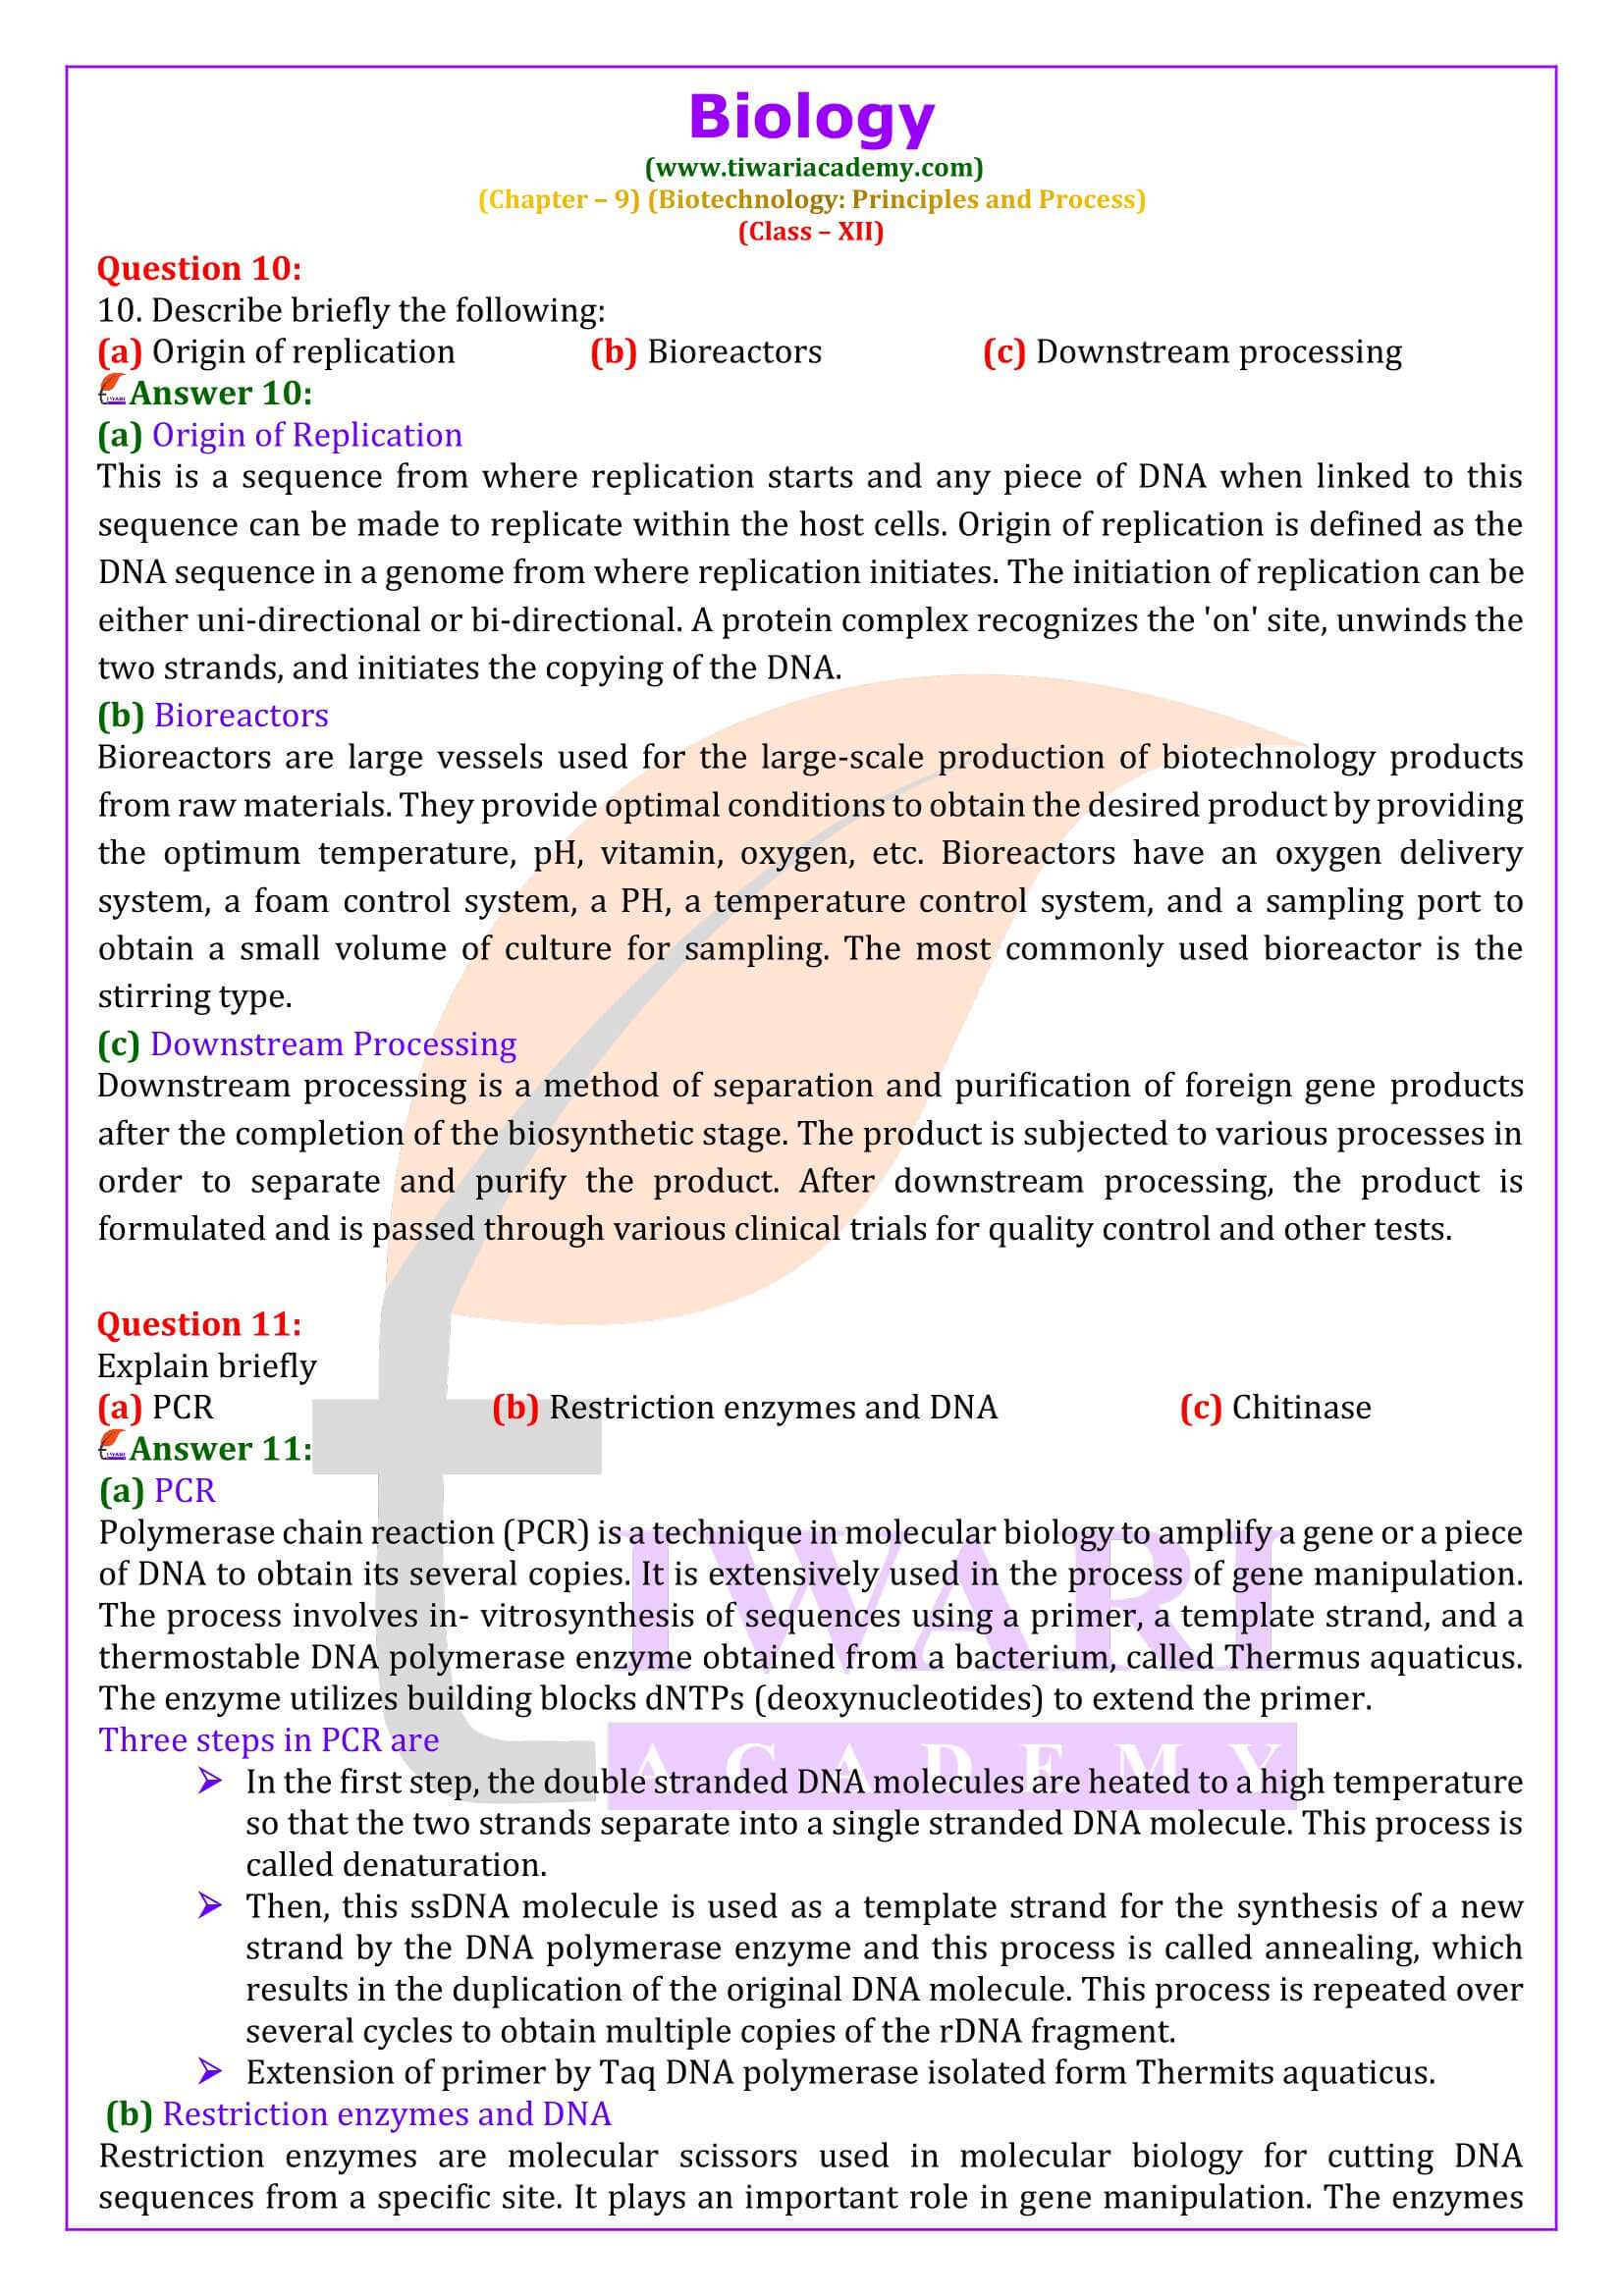 NCERT Solutions for Class 12 Biology Chapter 9 in English Medium